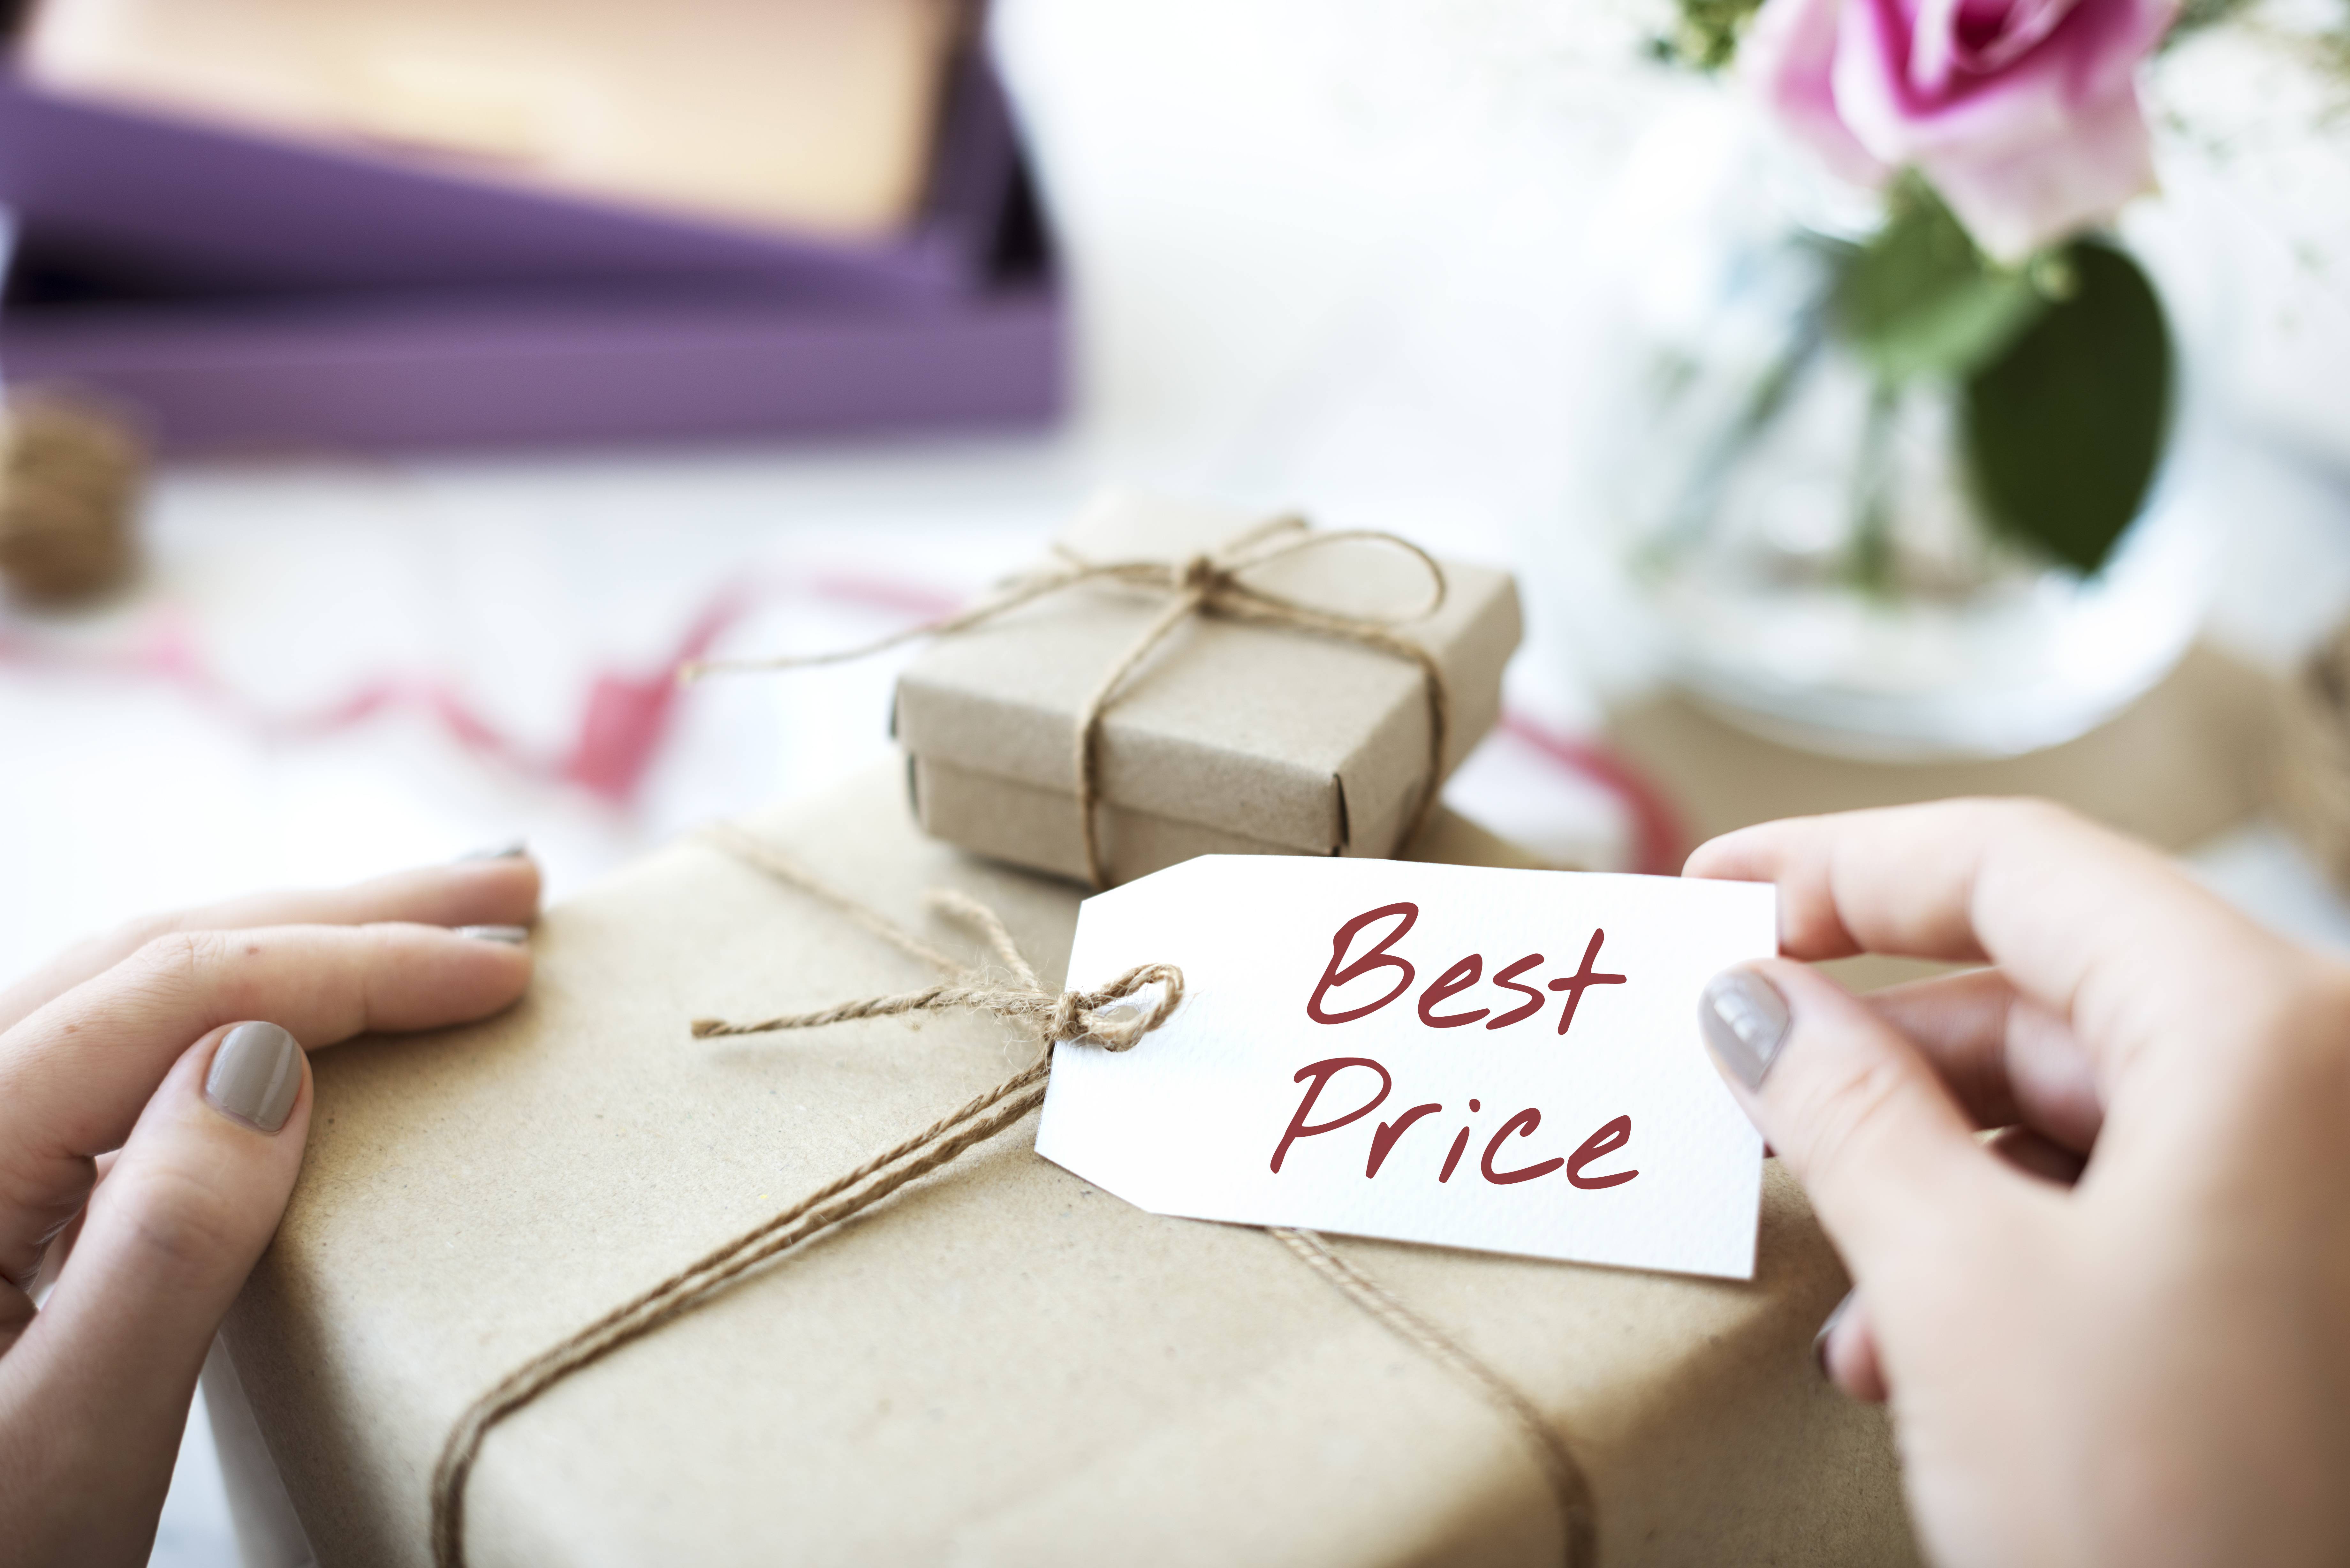 Customers get better price without effort 